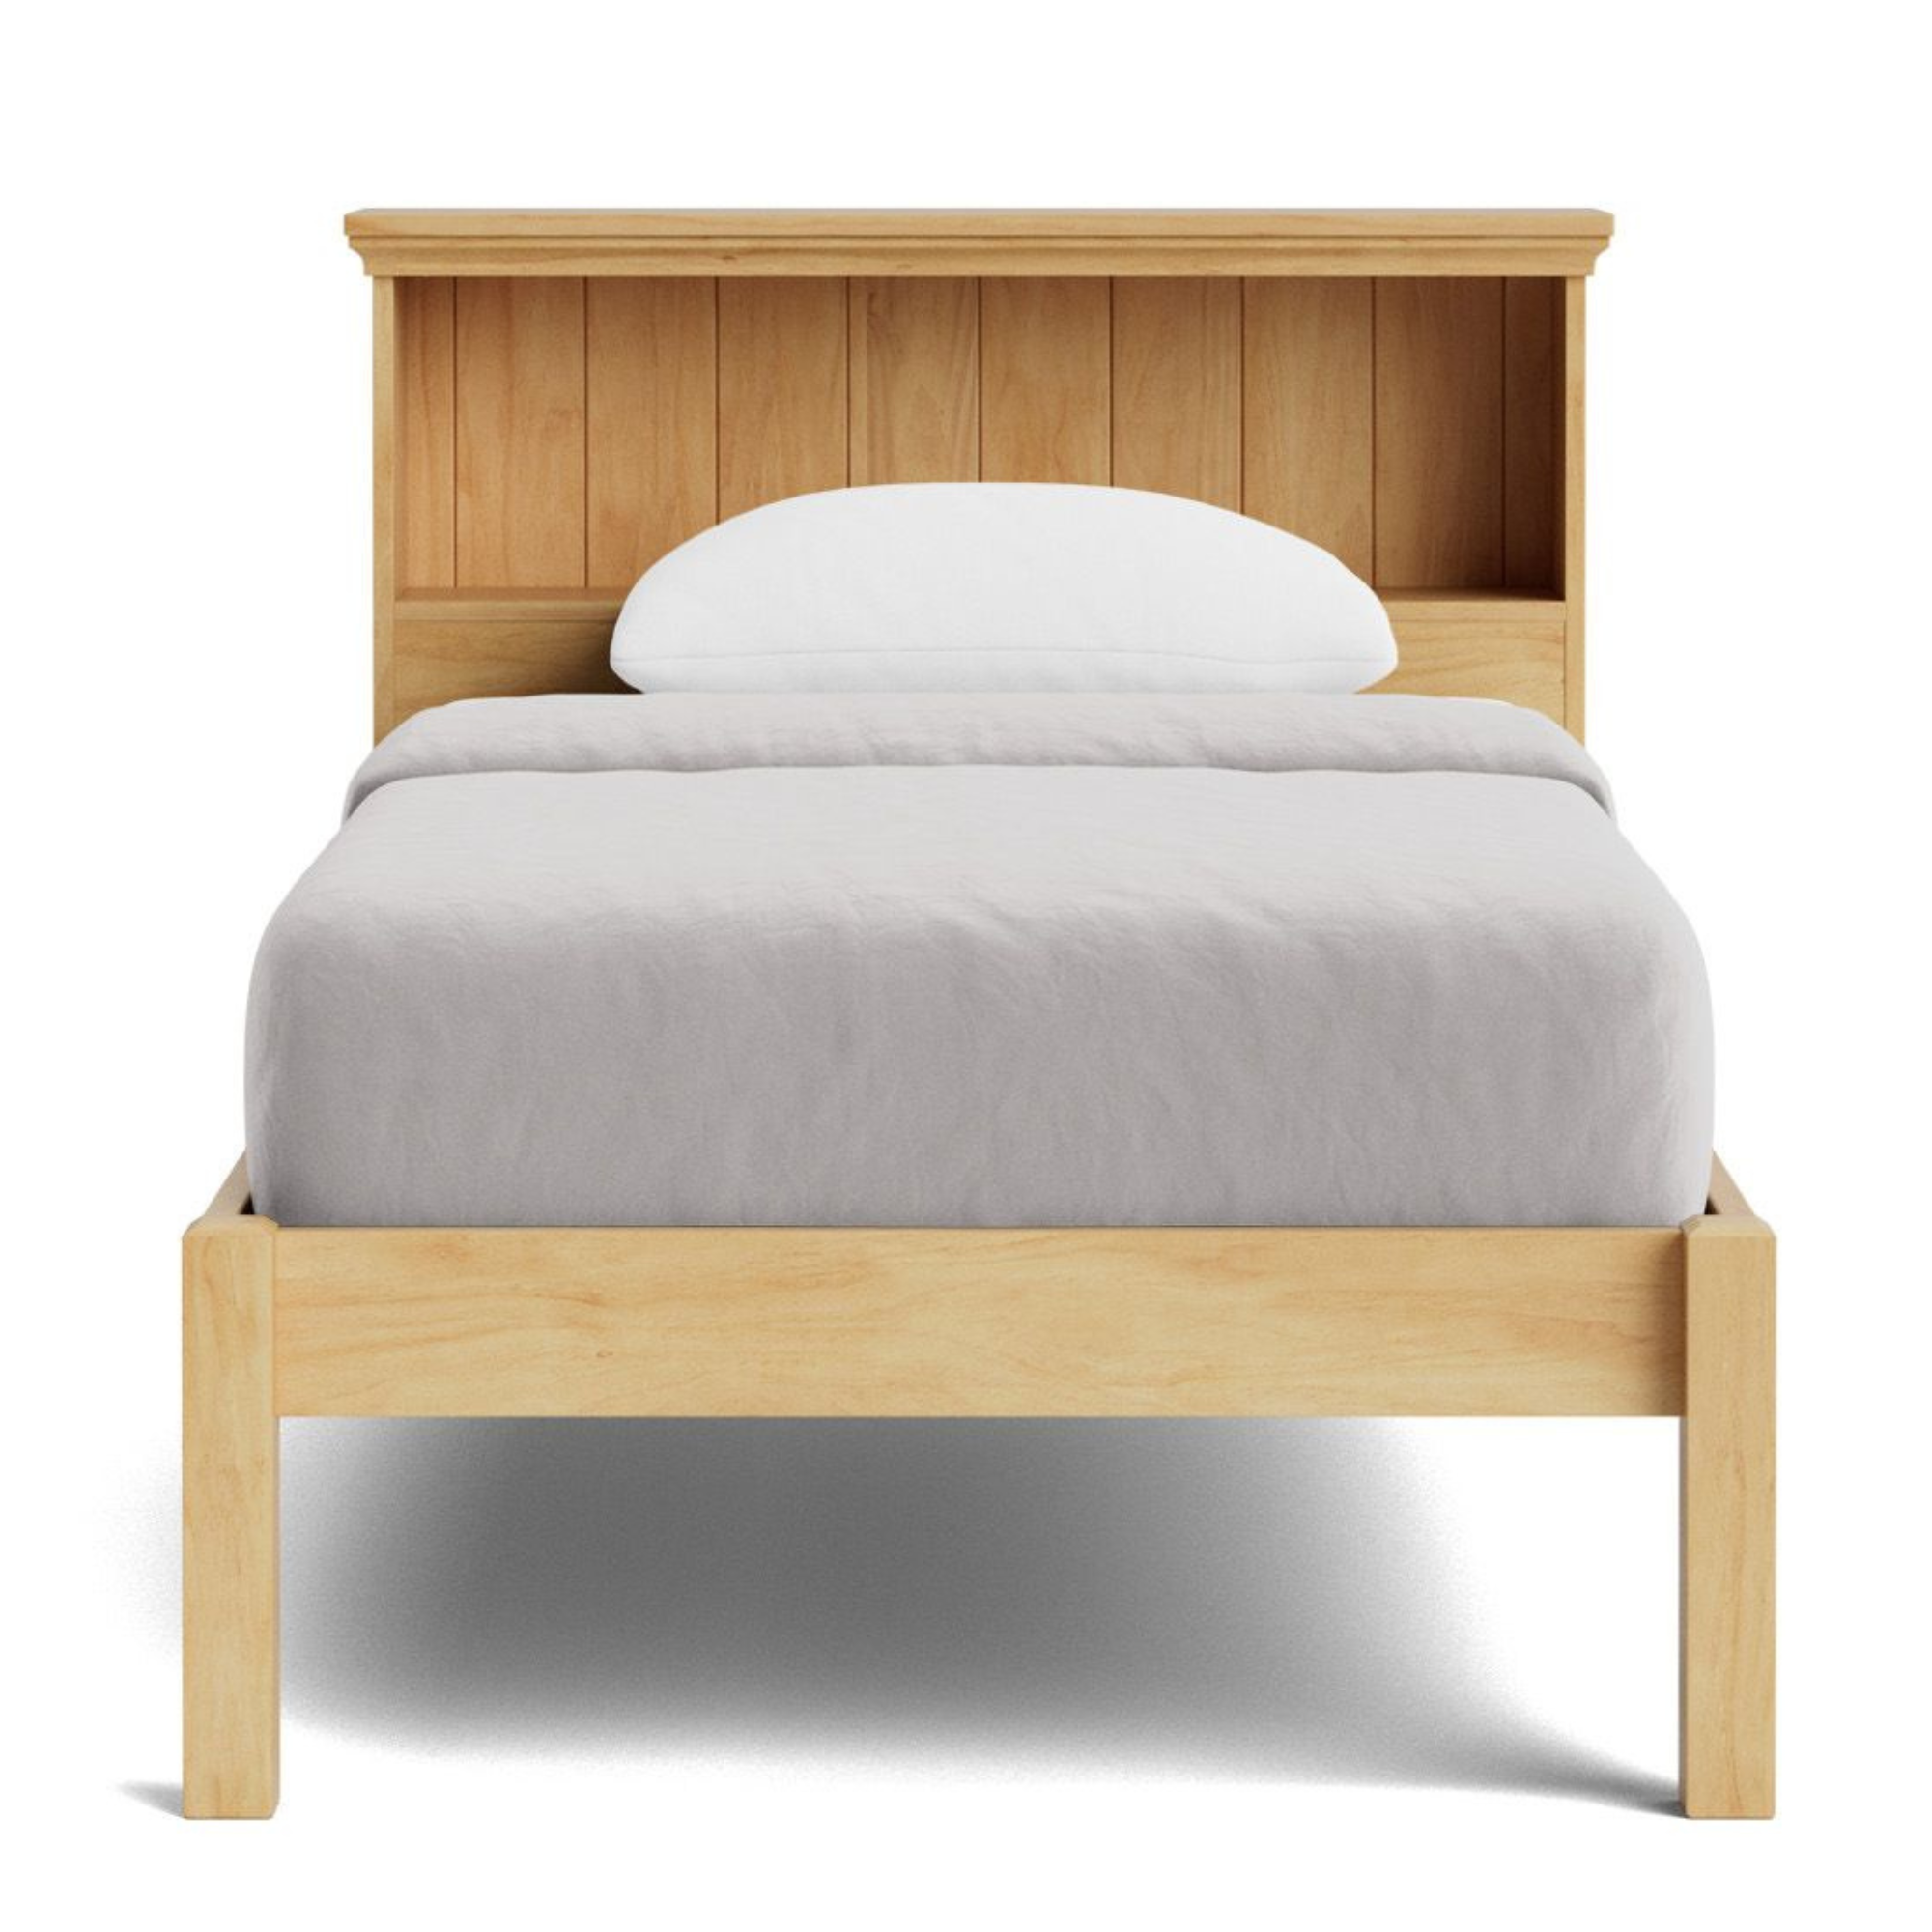 ADVENTURE SLAT BED WITH HEAD-END SHELF | LOW-FOOT OR HIGH-FOOT | NZ MADE